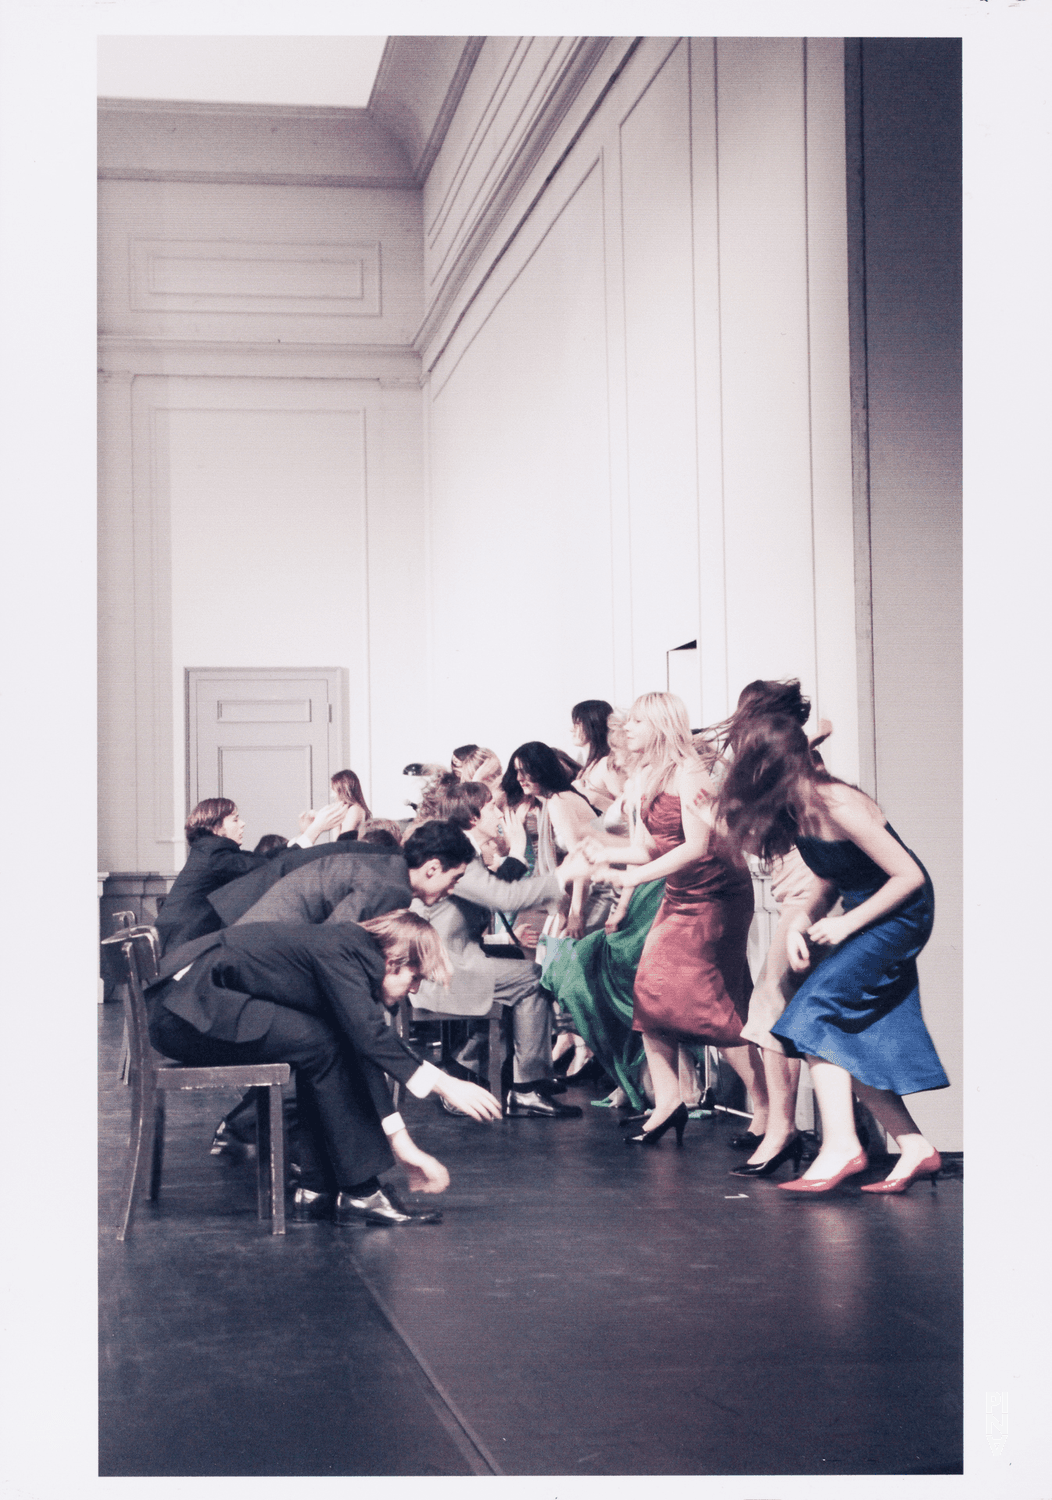 “Kontakthof. With Teenagers over 14” by Pina Bausch